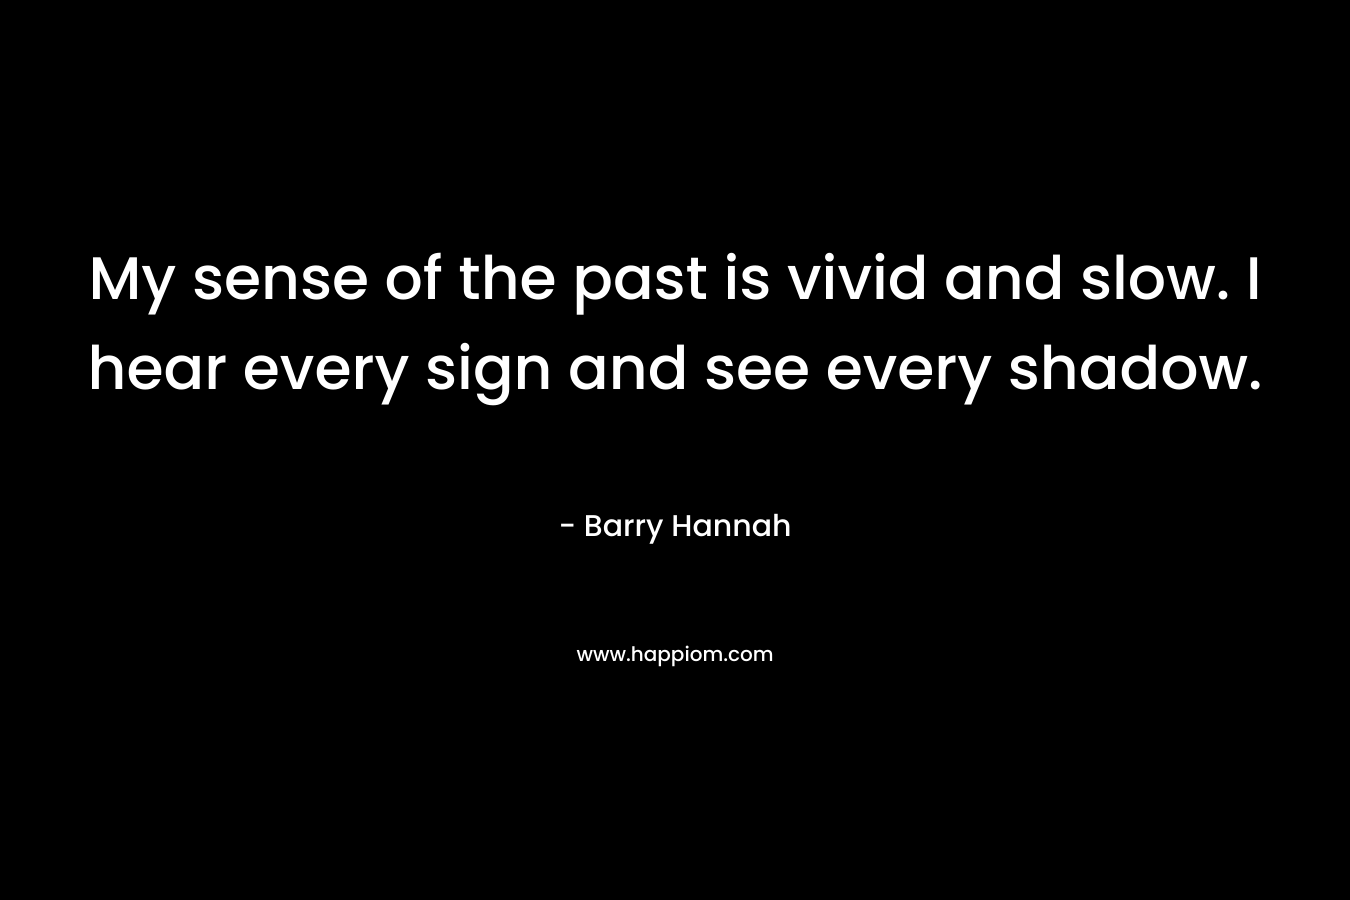 My sense of the past is vivid and slow. I hear every sign and see every shadow. – Barry Hannah